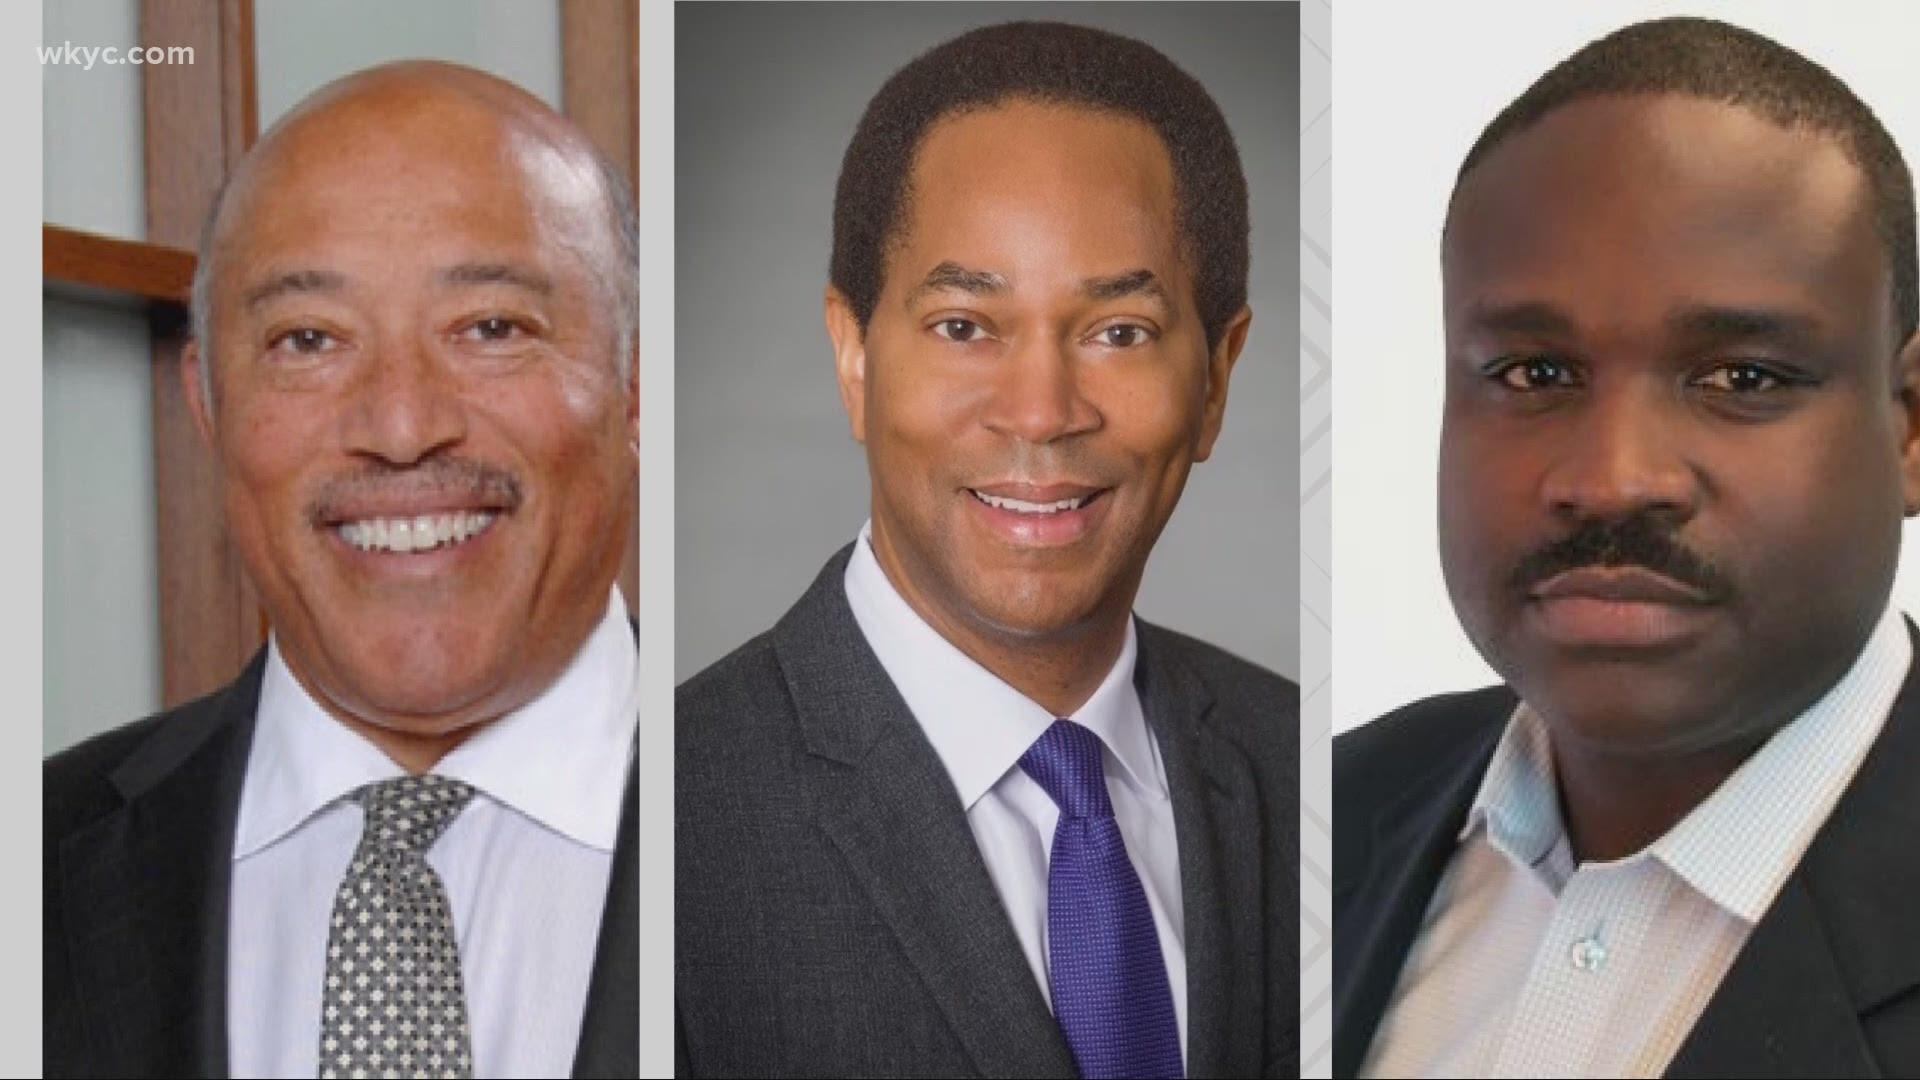 They saw a need and worked to find a solution. 3News' Russ Mitchell spoke with three prominent figures in the Black community on their approach to closing the gap.